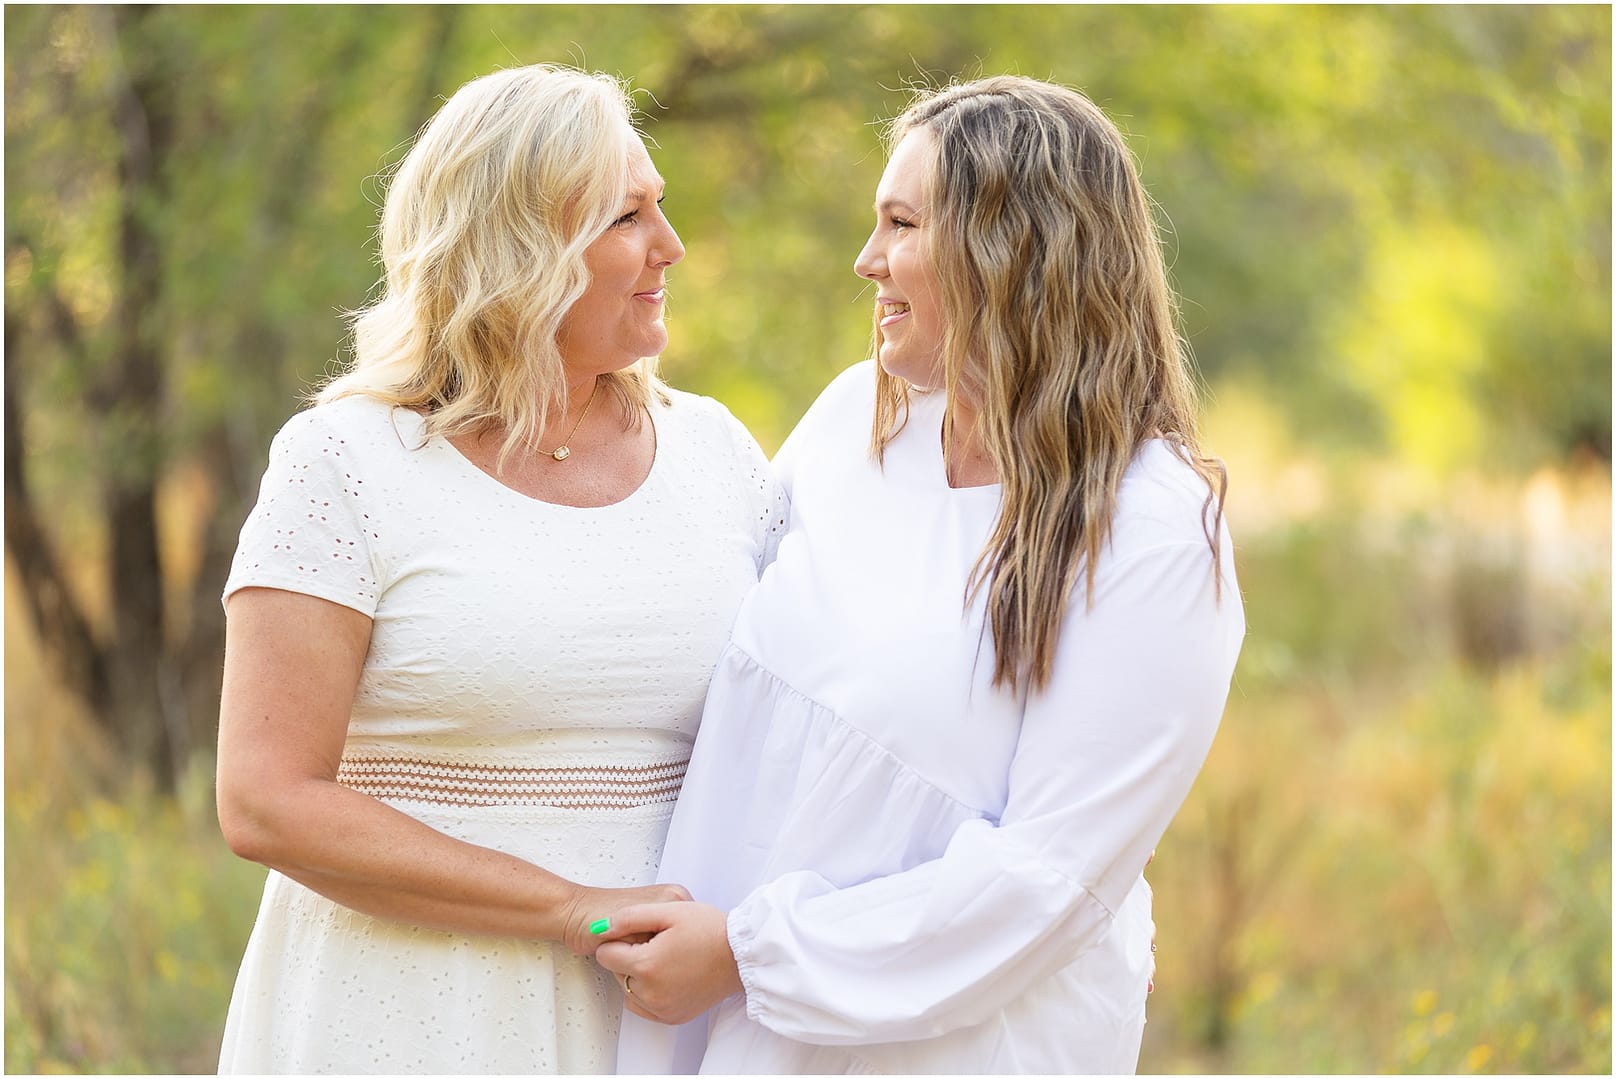 Mom and daughter hold hands during Boise family photoshoot. Photo by Tiffany Hix Photography.